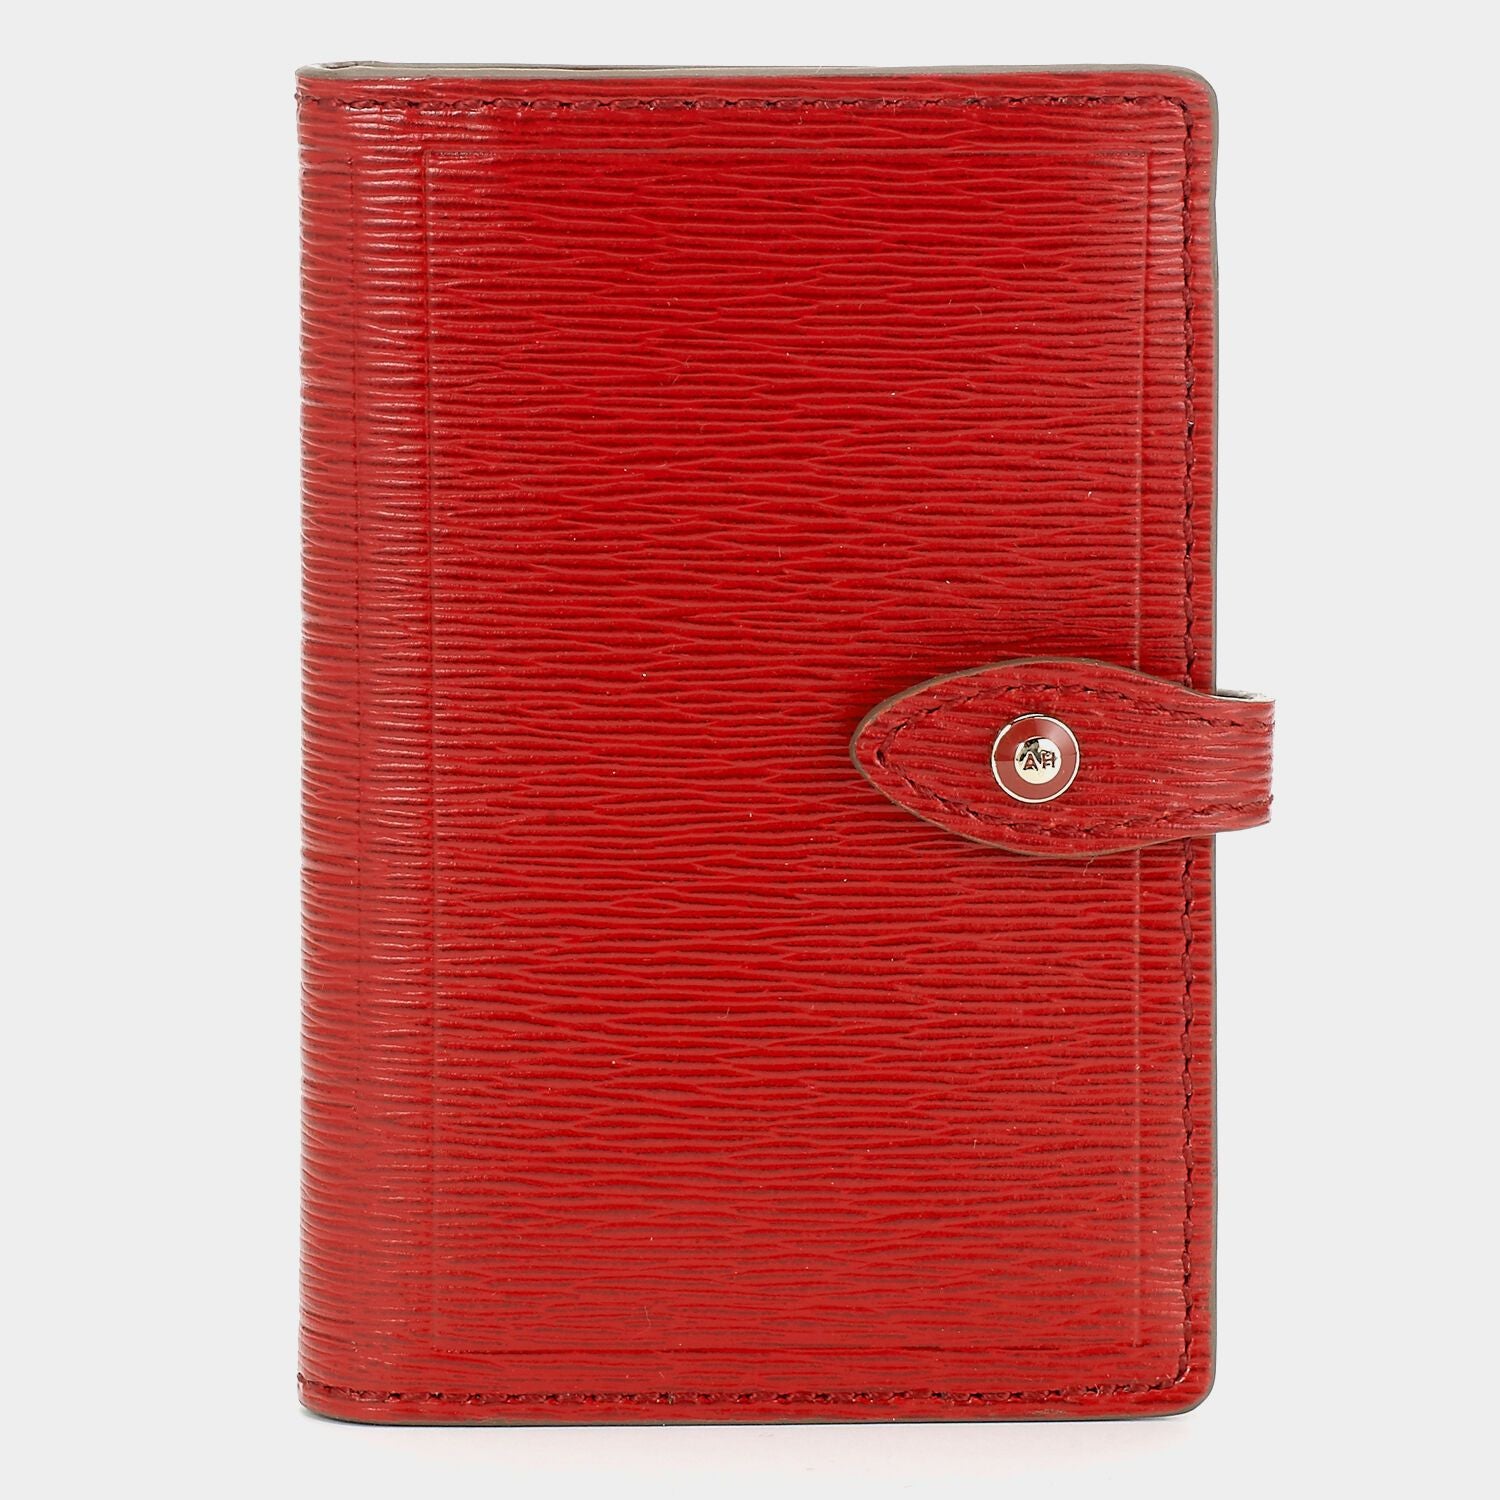 Bespoke In & Out Case -

                  
                    London Grain in Red -
                  

                  Anya Hindmarch EU
